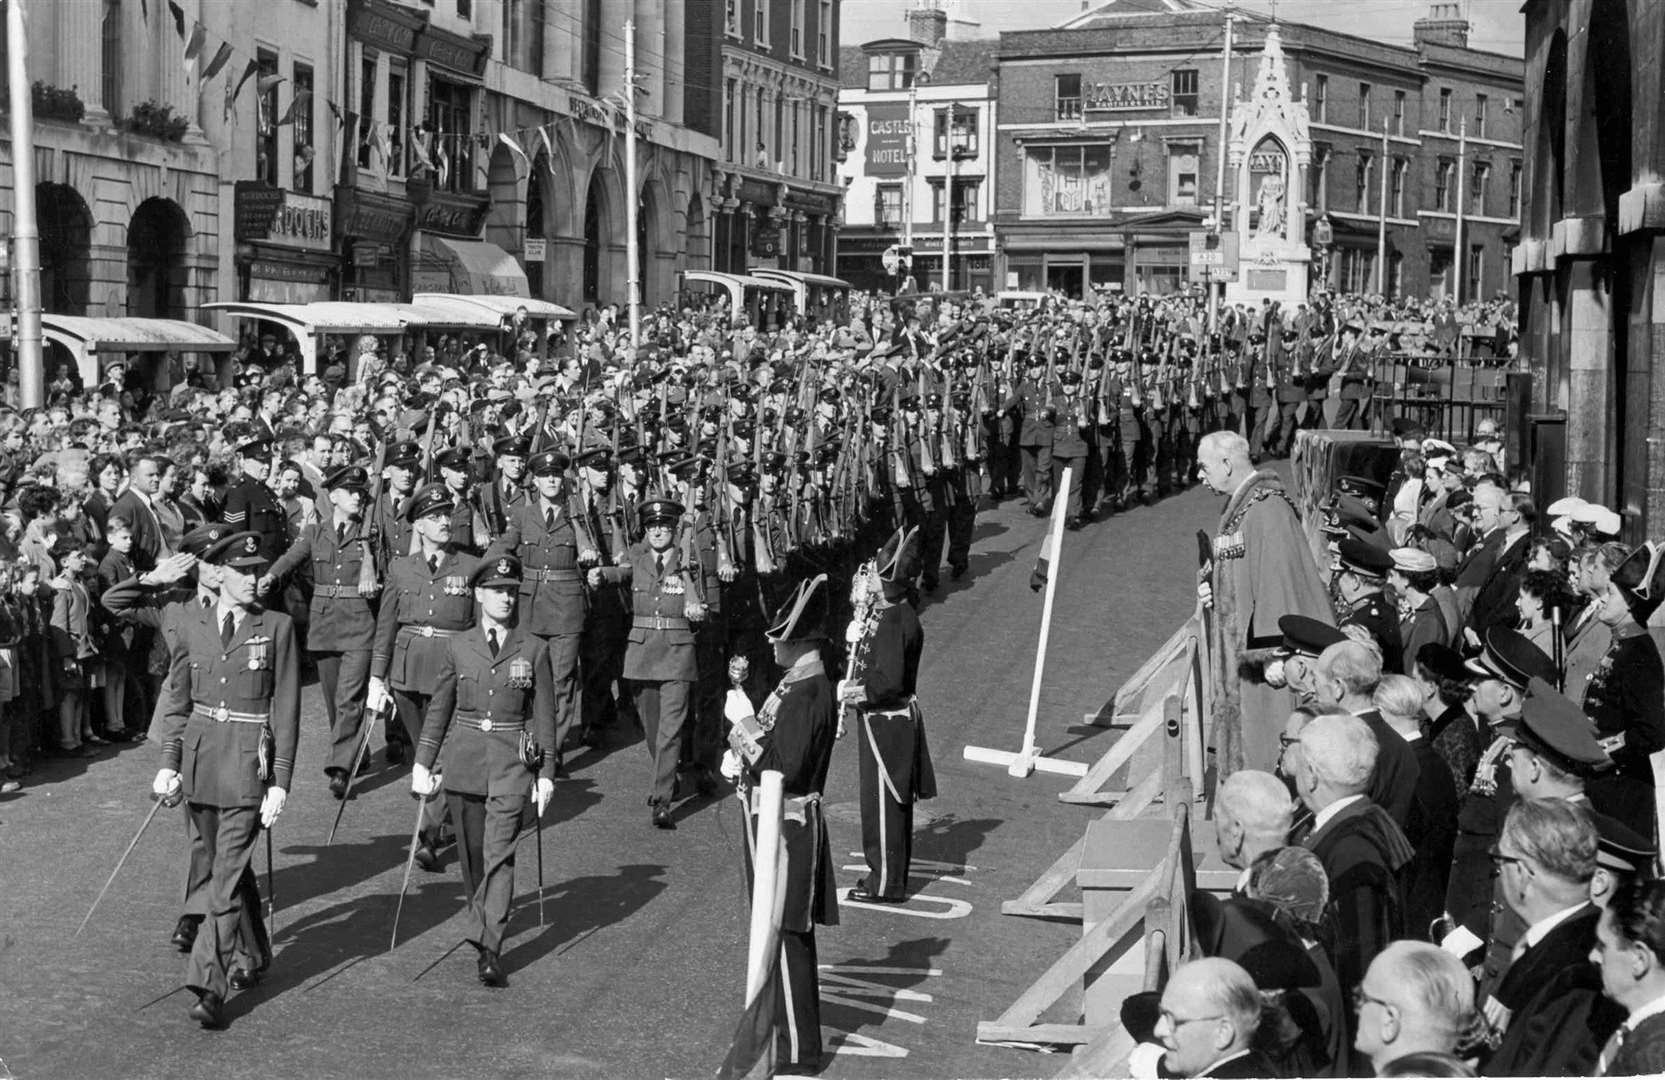 In August 1956, Maidstone gave the Freedom of the Borough to Kent's Royal Air Force Bomber squadron 500